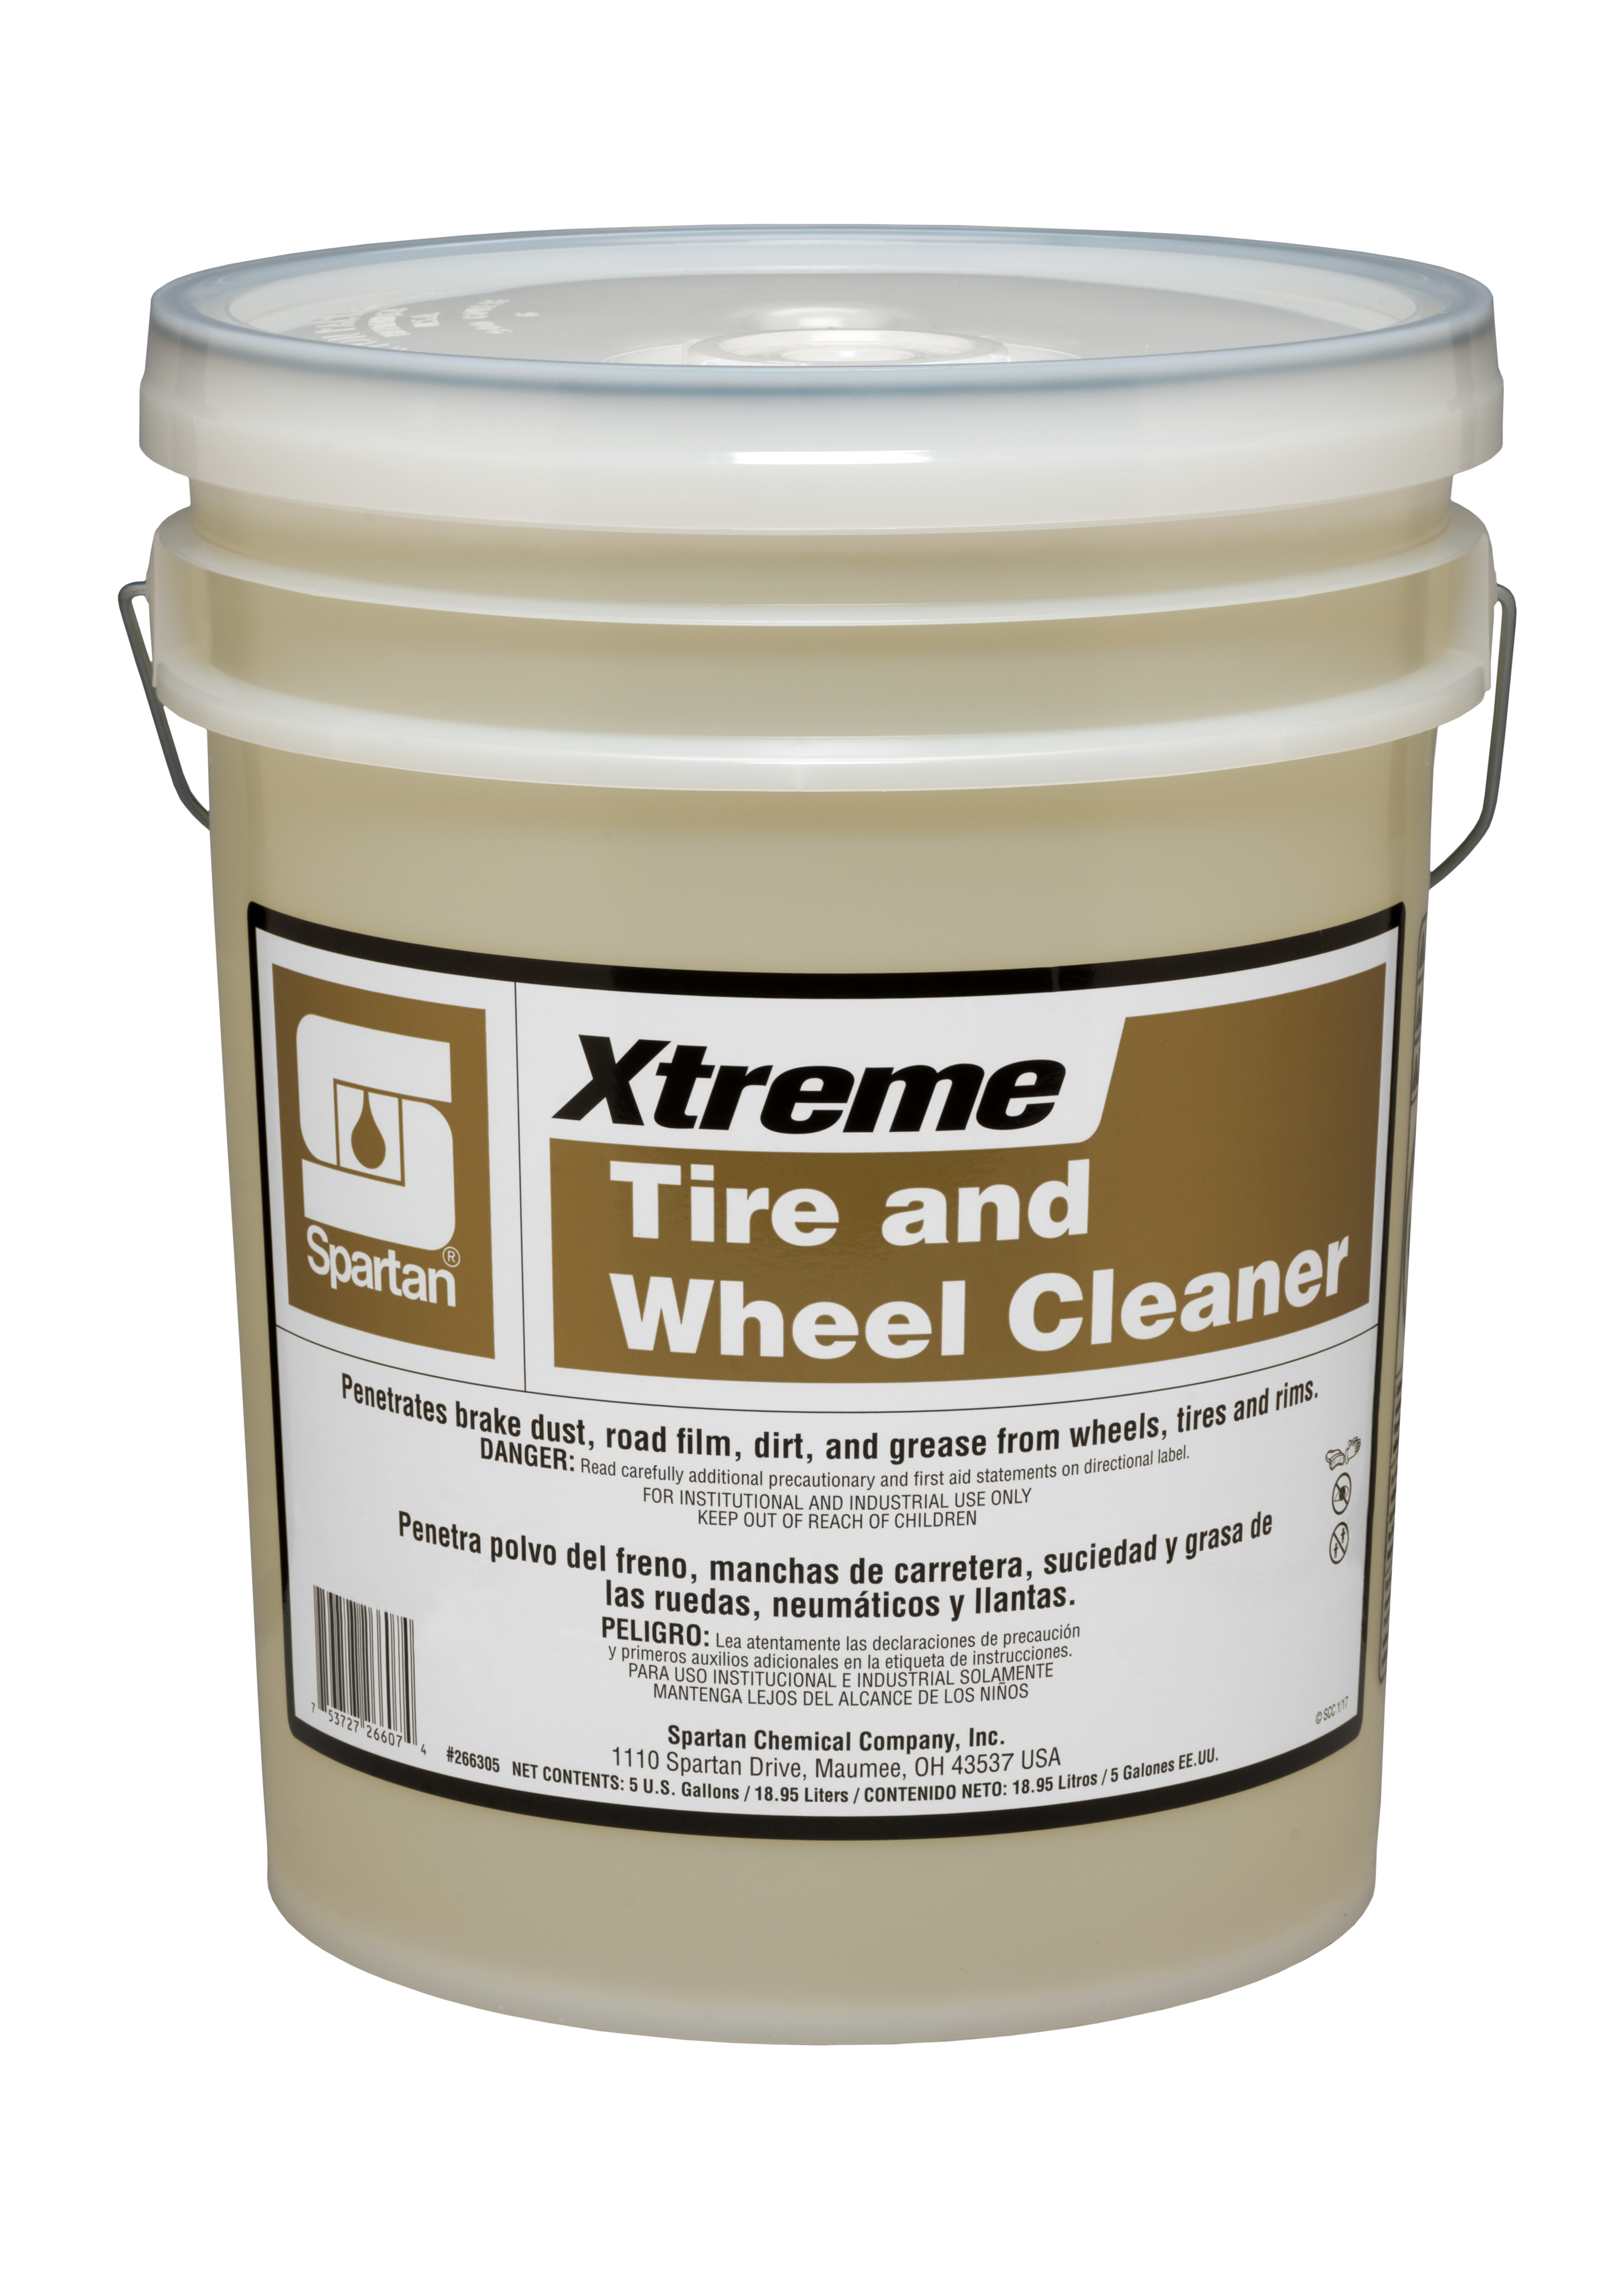 Spartan Chemical Company Xtreme Tire and Wheel Cleaner, 5 GAL PAIL